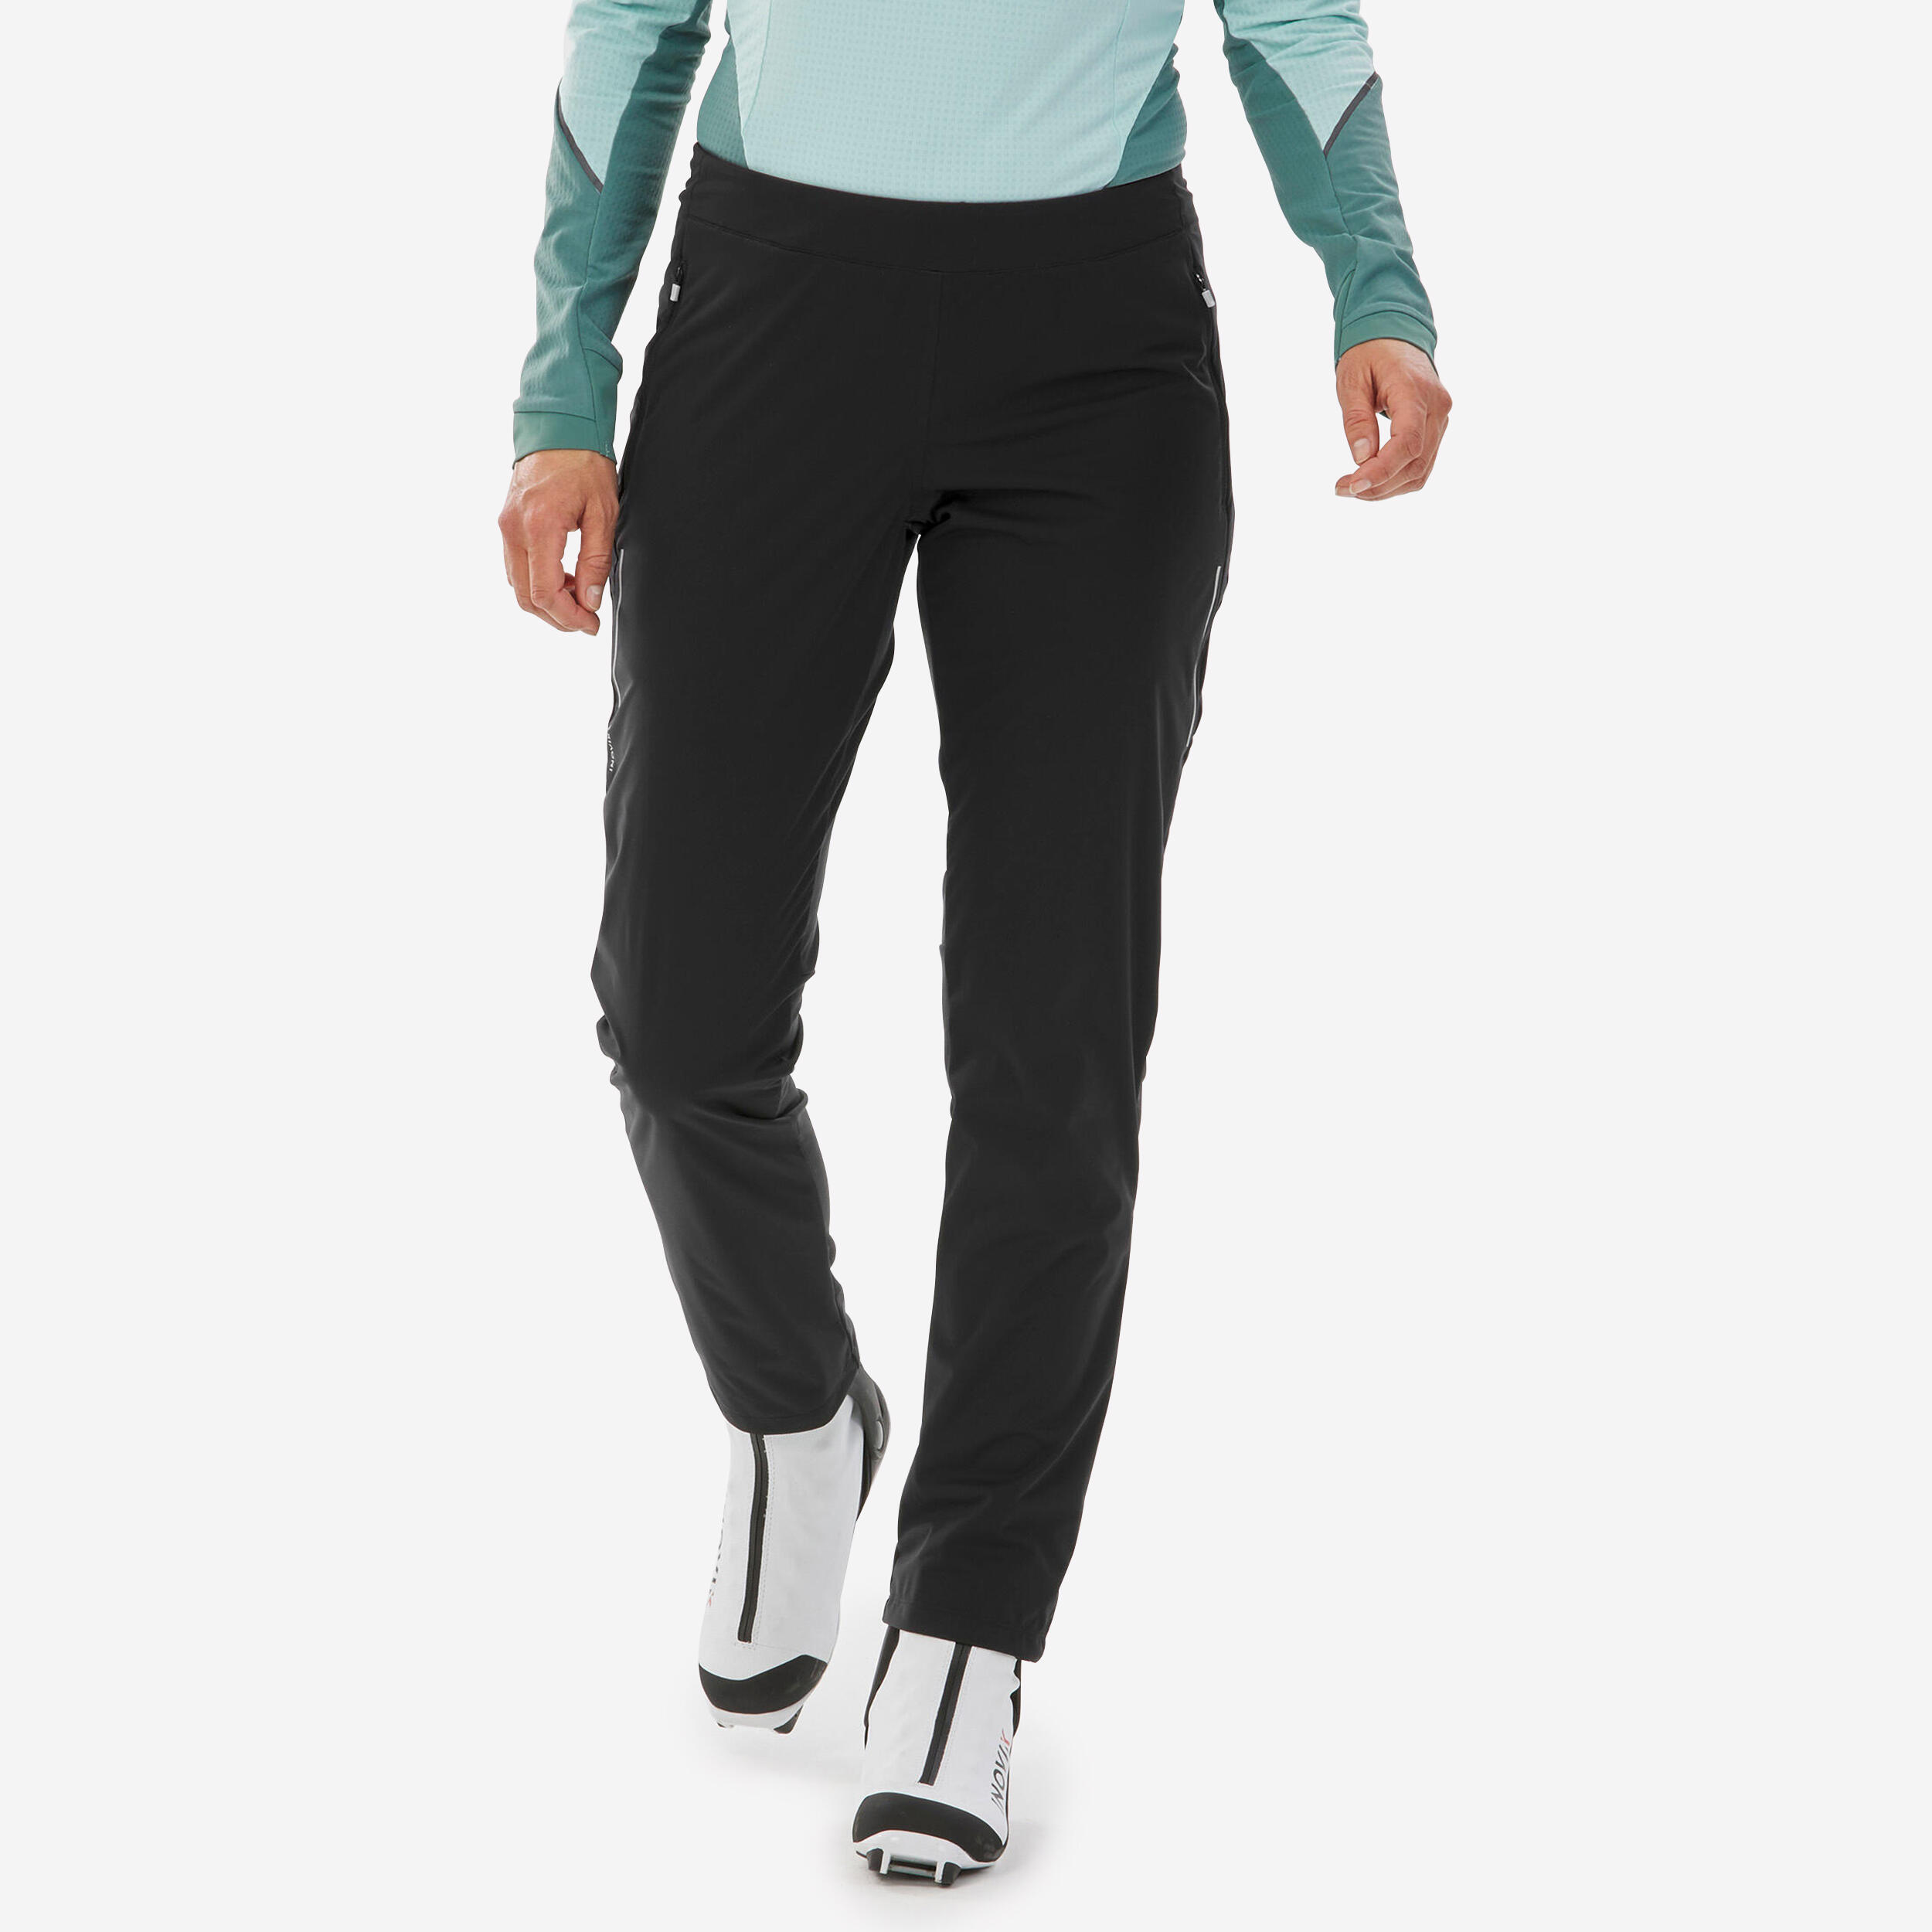 Women's Cross-country Skiing Trousers XC S Pant 500 1/10